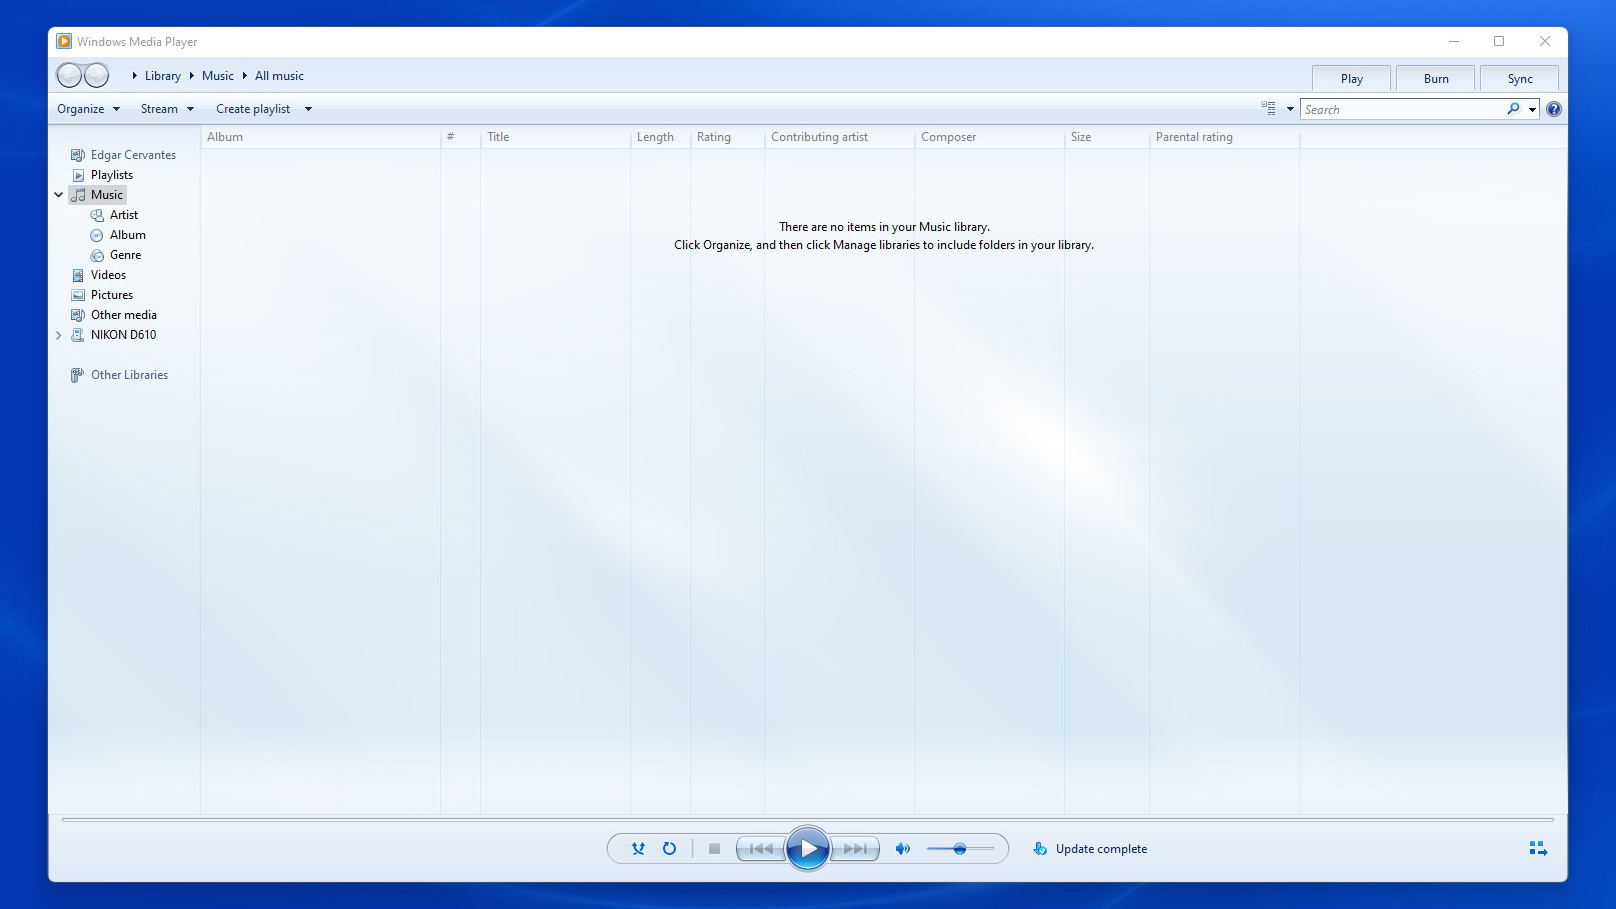 Windows Media Player - The best music players for pc